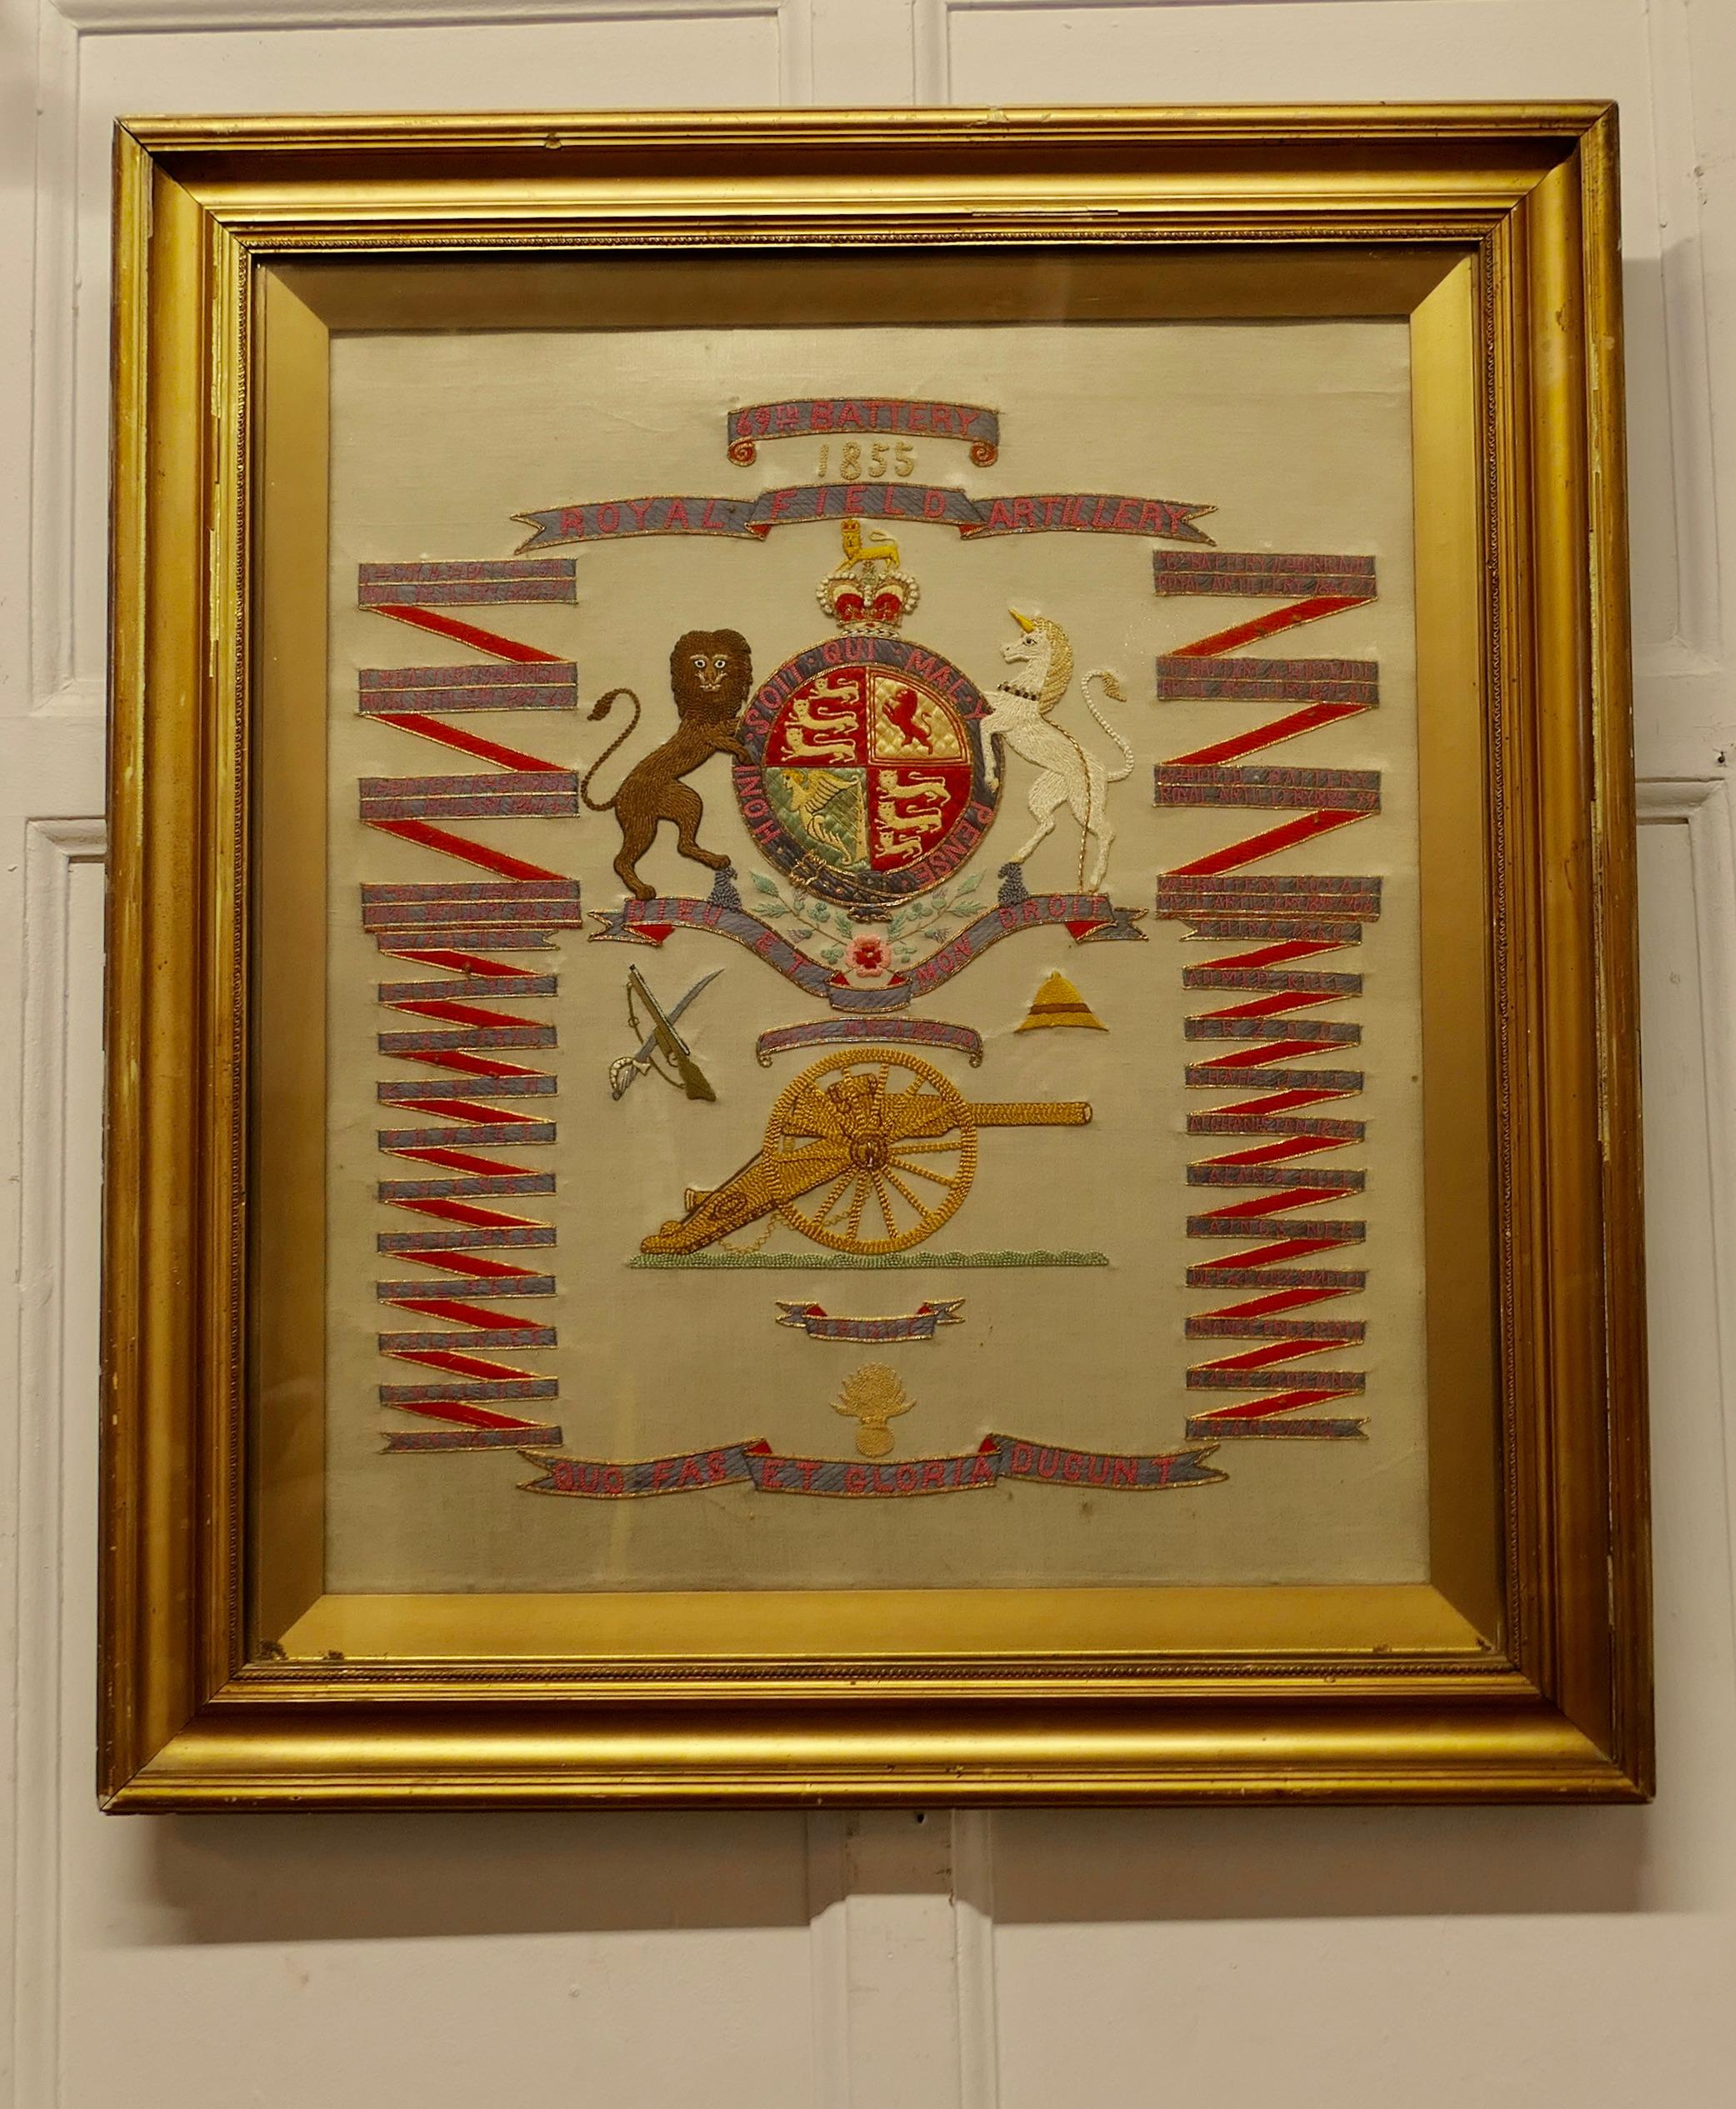  69th Battery Royal Field Artillery Framed Commemorative Embroidery 

A stunning piece, in fine detail applied and embroidered tapestry, showing the counties and campaigns from 1855 
Very precisely detailed work, in very good Condition in original